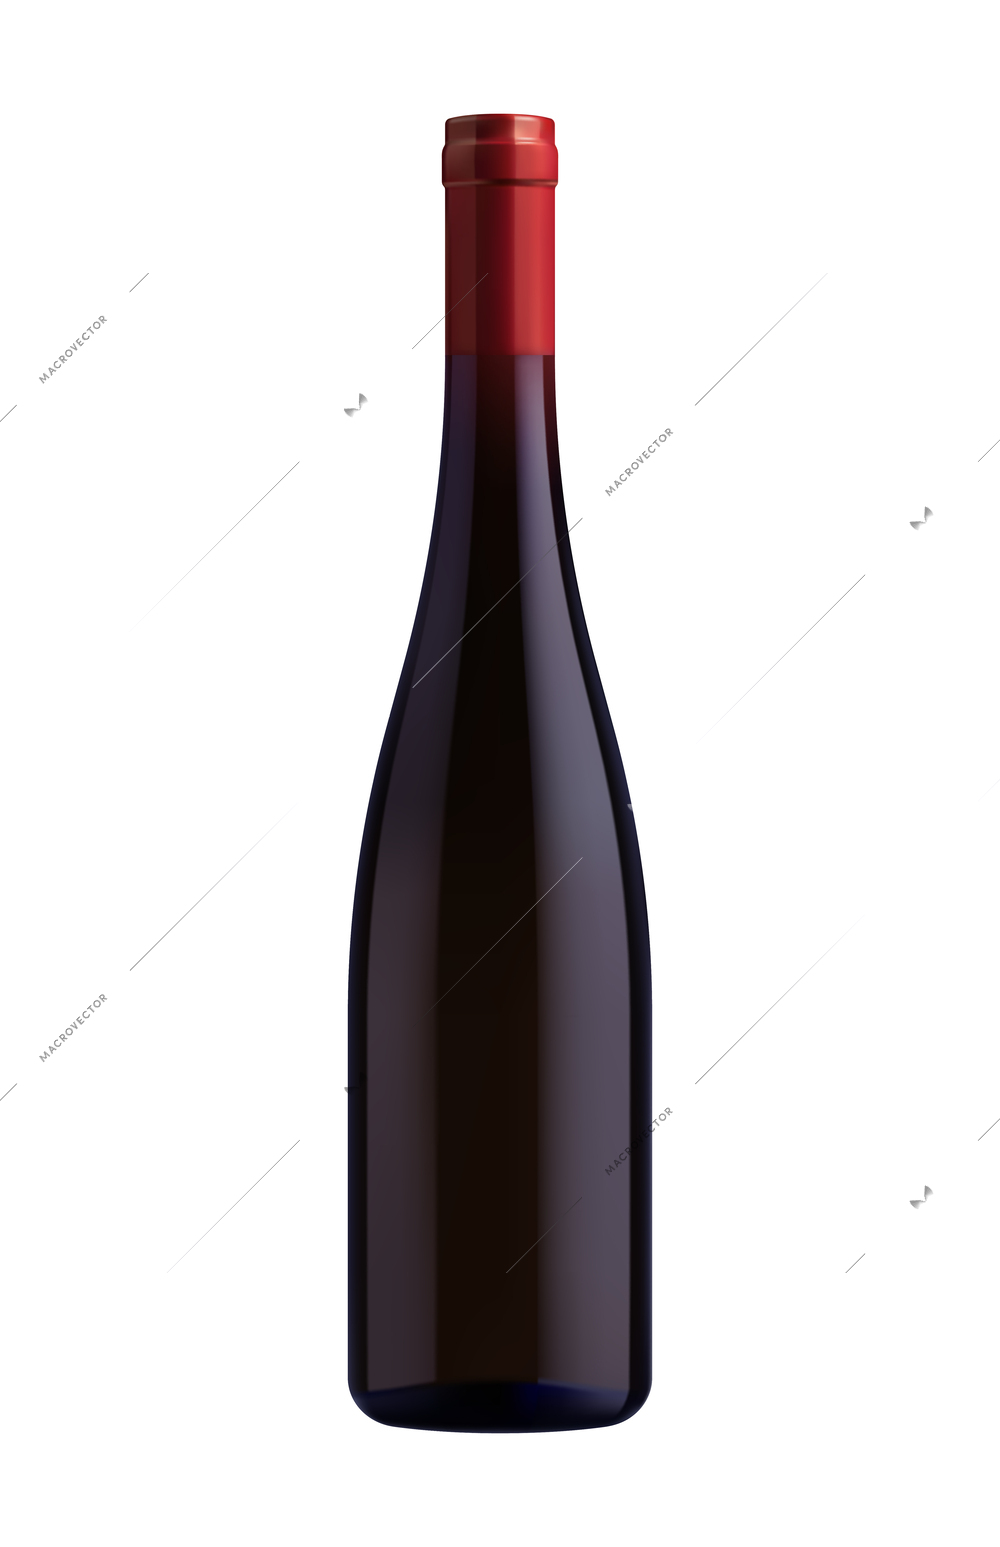 Wine realistic composition with isolated image of bottled alcohol on blank background vector illustration